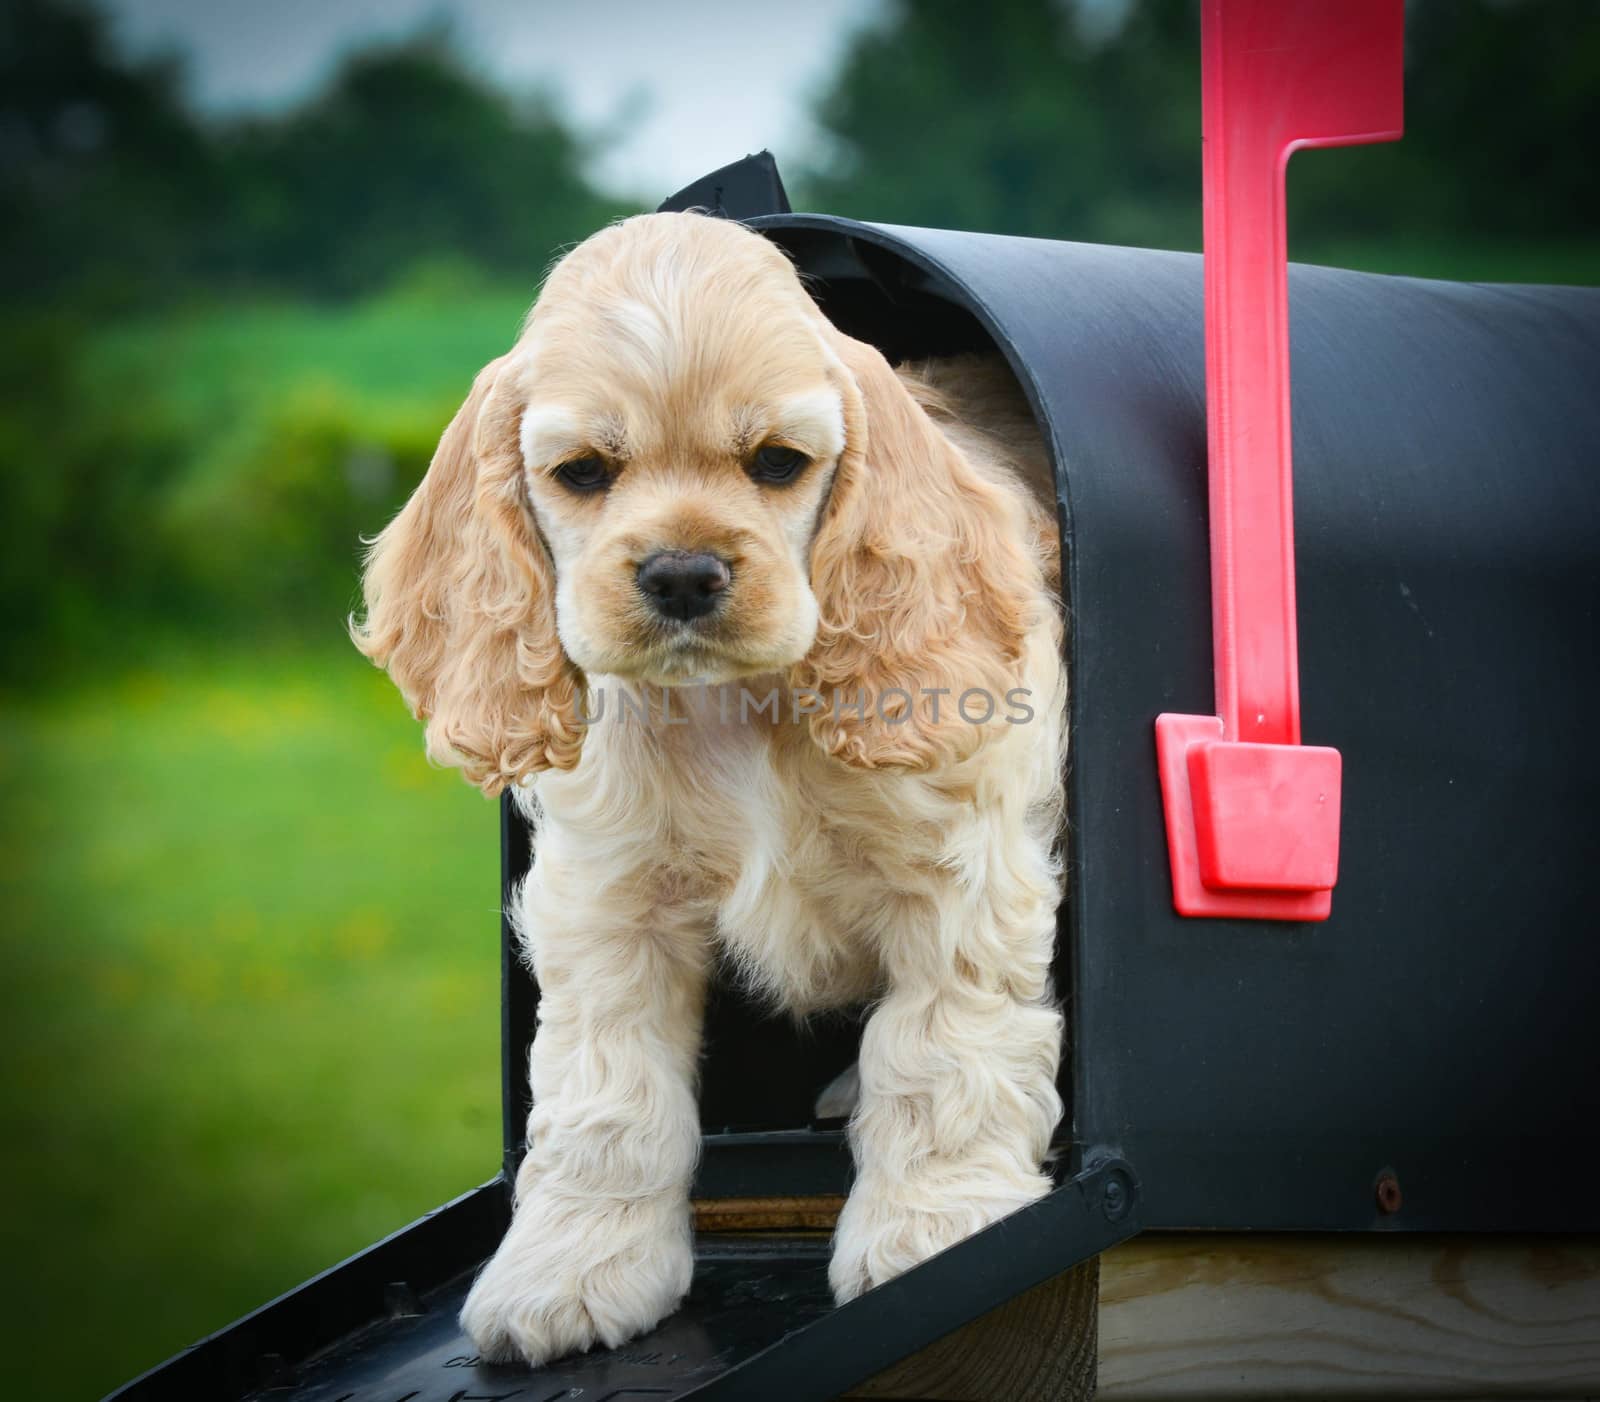 special delivery - cute puppy peeking out of a mailbox